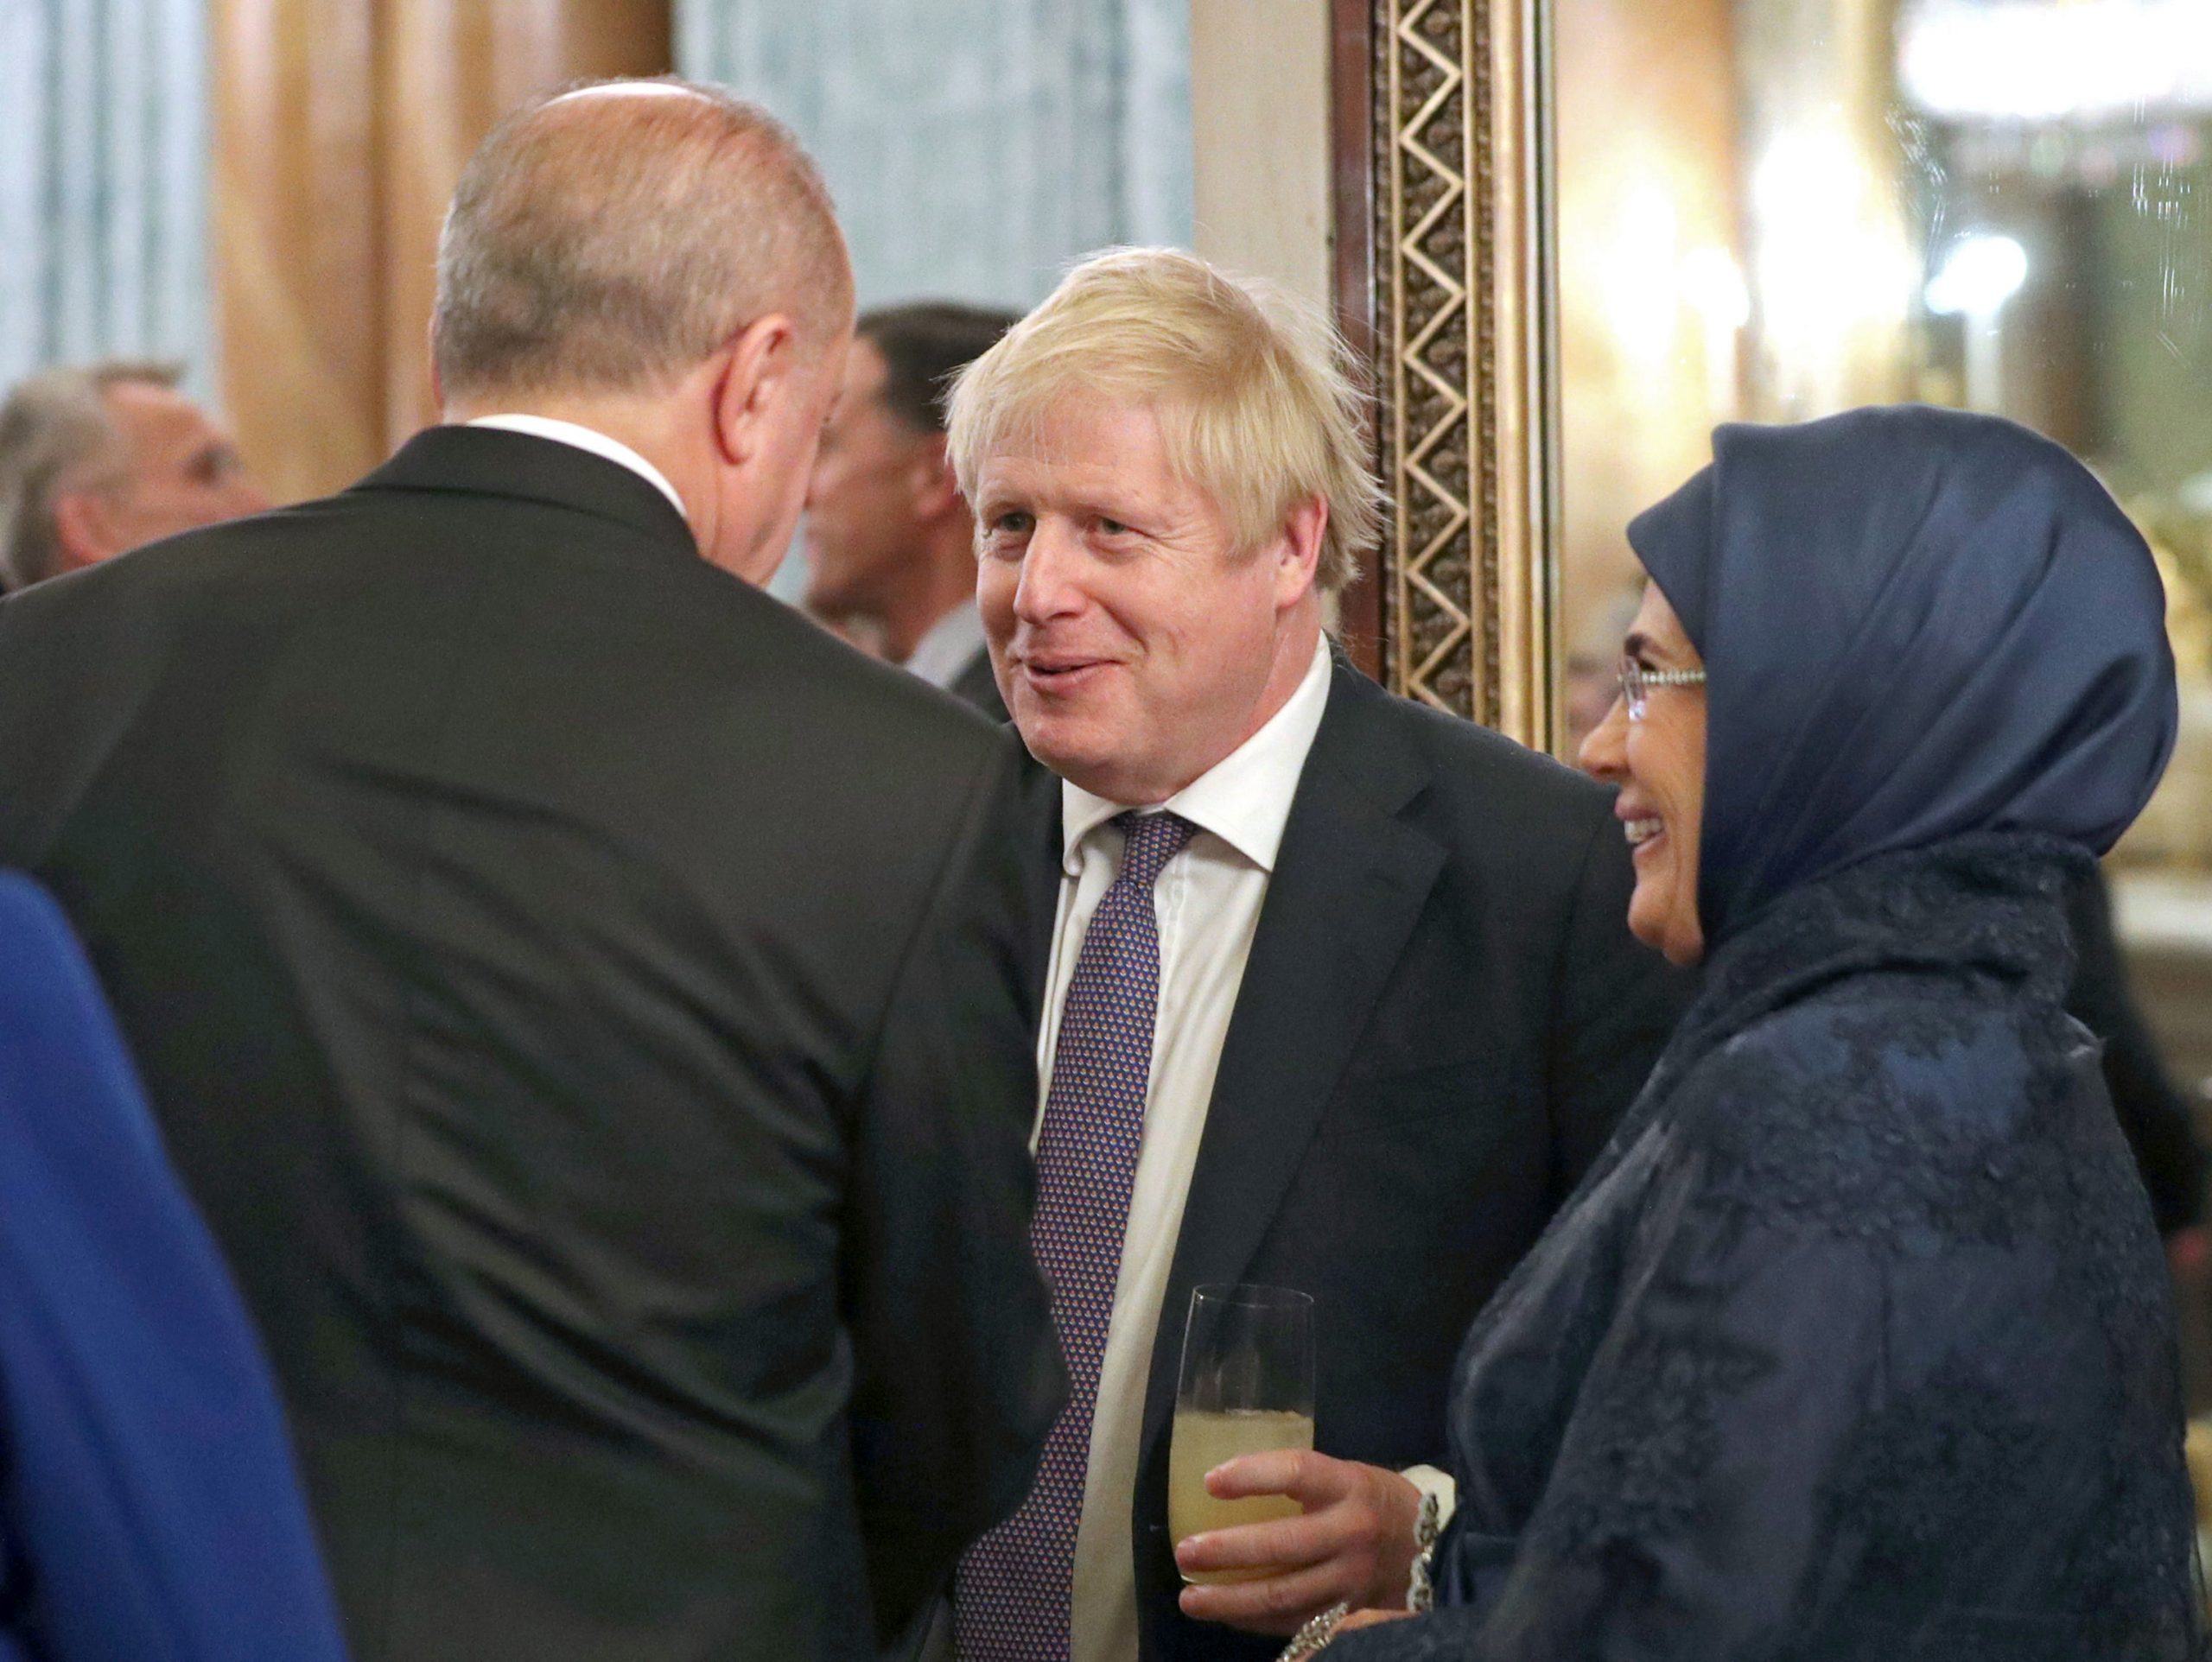 epa08042085 Britain's Prime Minister Boris Johnson (C) talks with Turkish President Recep Tayyip Erdogan (L) and his wife Emine (R) during a reception at Buckingham Palace, London, as leaders gather to mark 70 years of the alliance during the NATO Summit in London, Britain, 03 December 2019. NATO countries' heads of states and governments gather in London for a two-day meeting.  EPA/Yui Mok / POOL